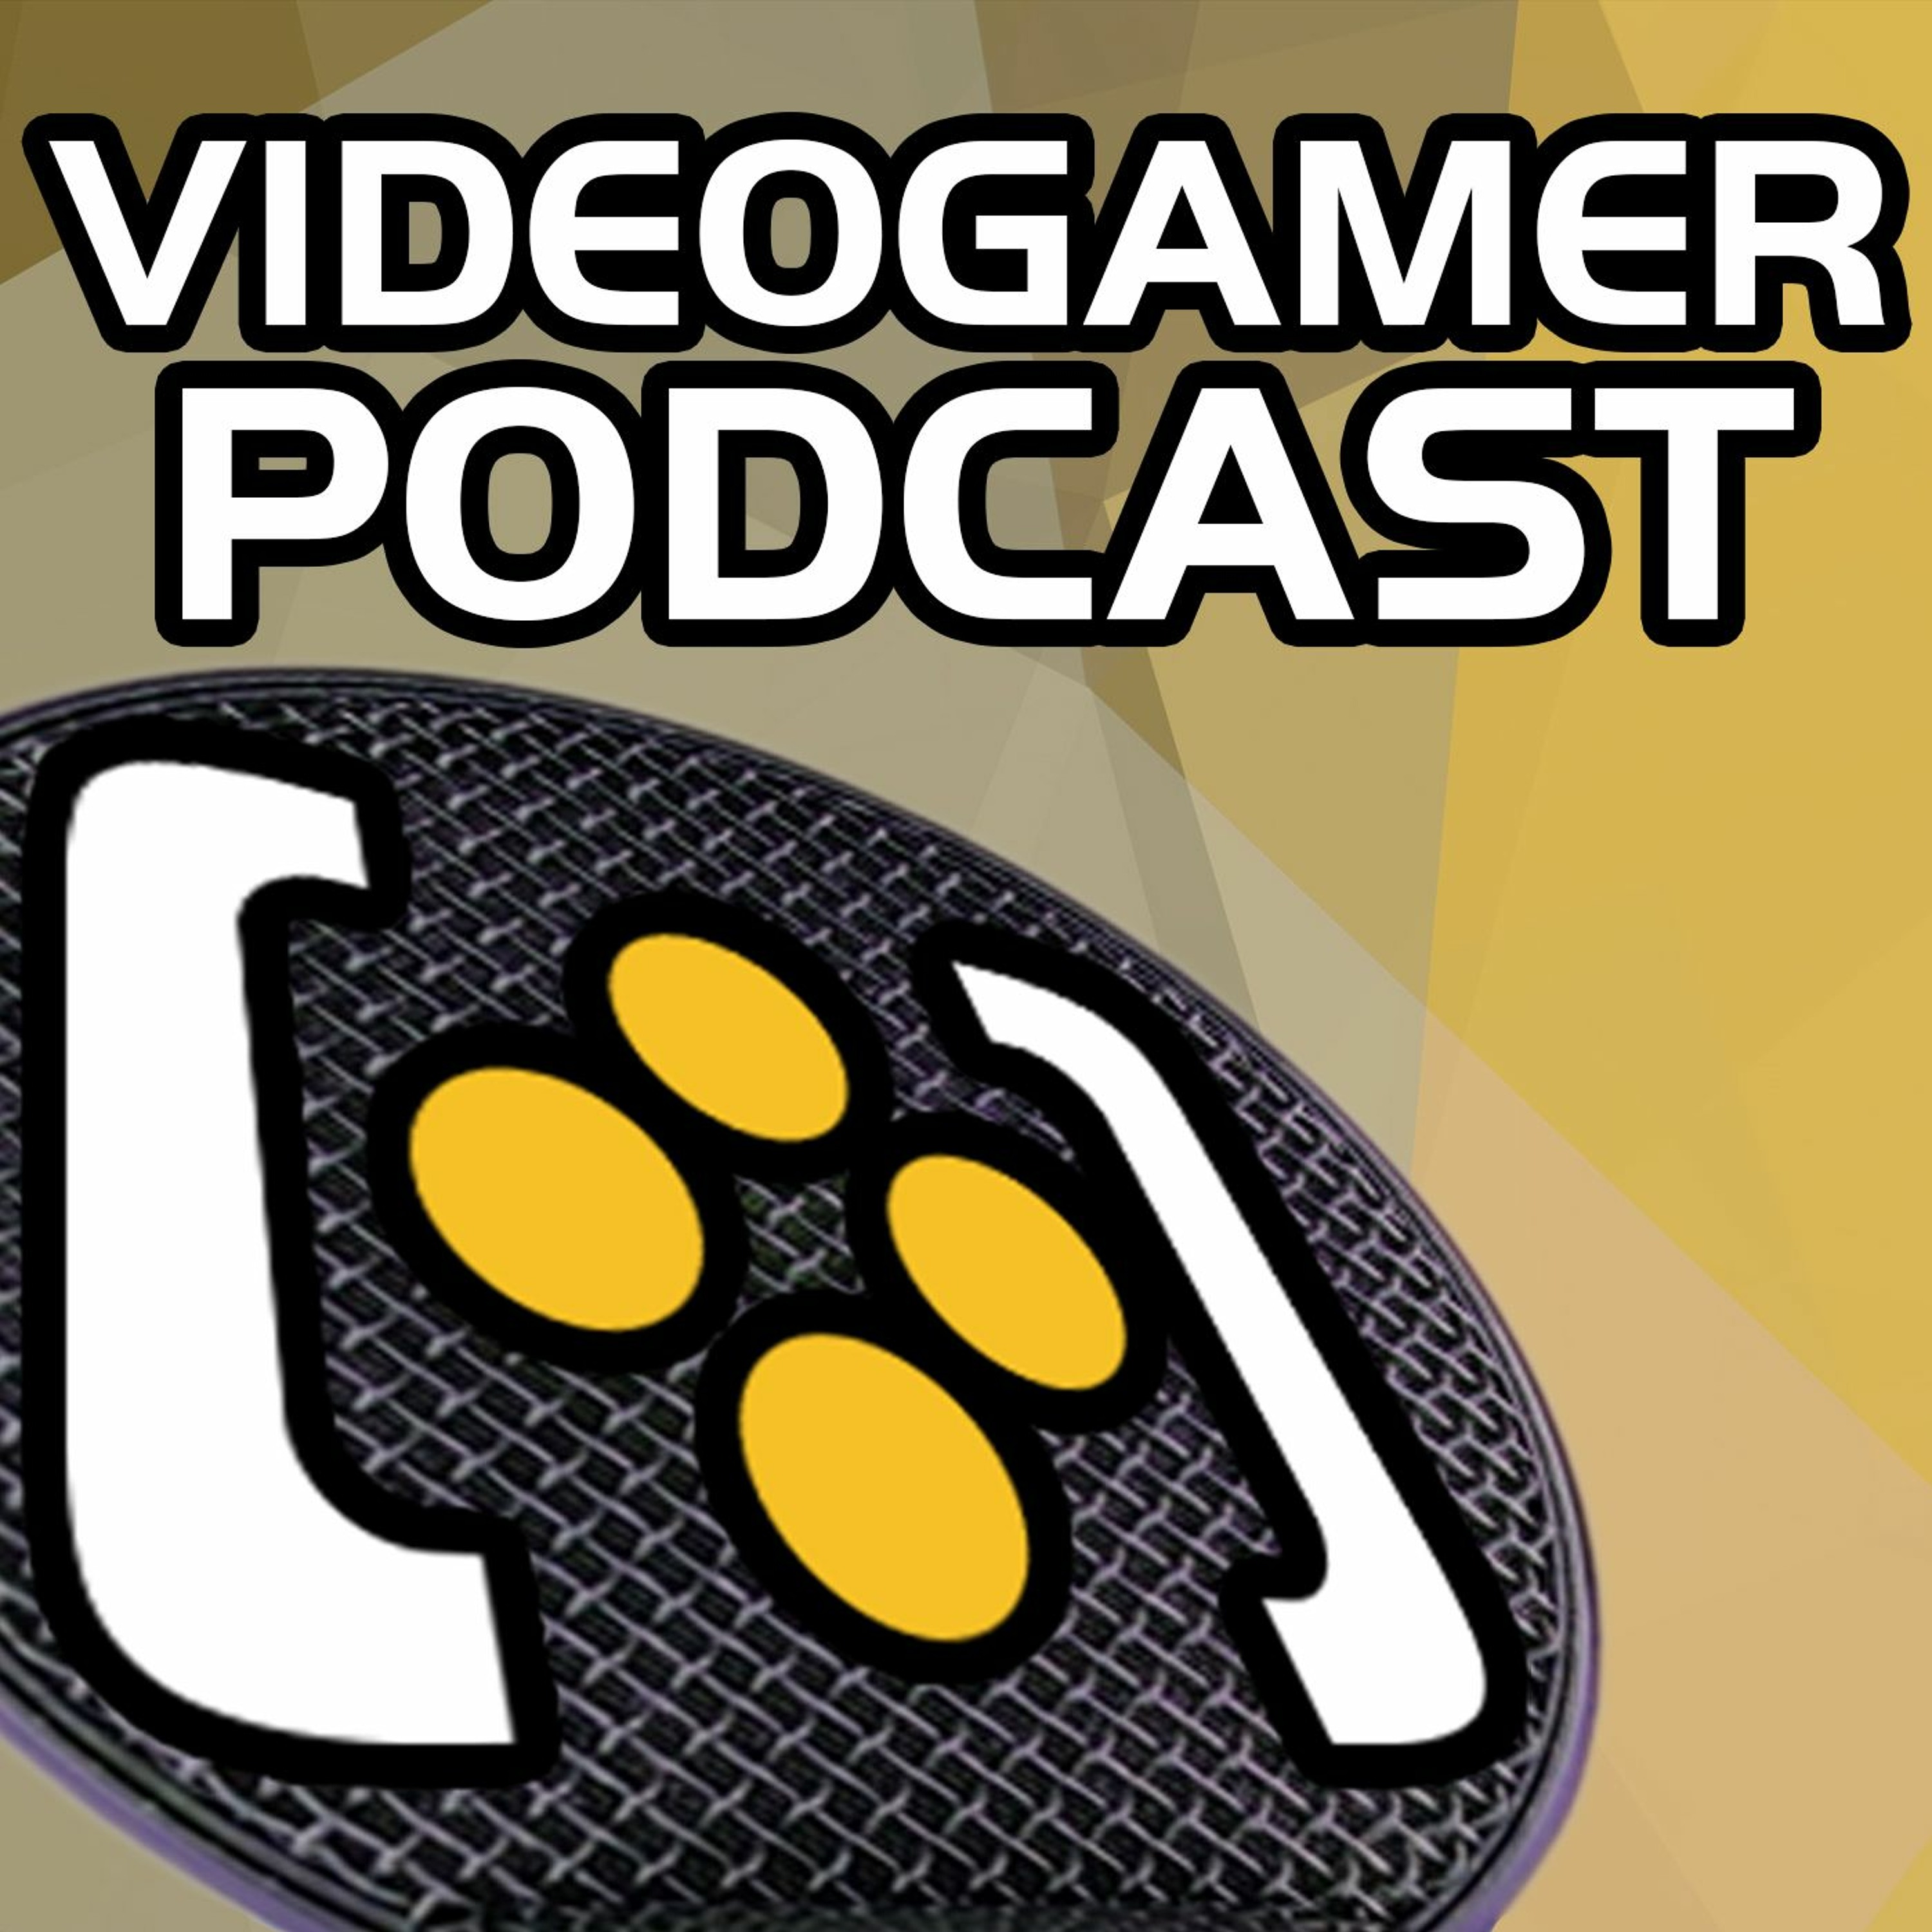 VideoGamer Podcast #489: Good Bugs and Dead Bugs